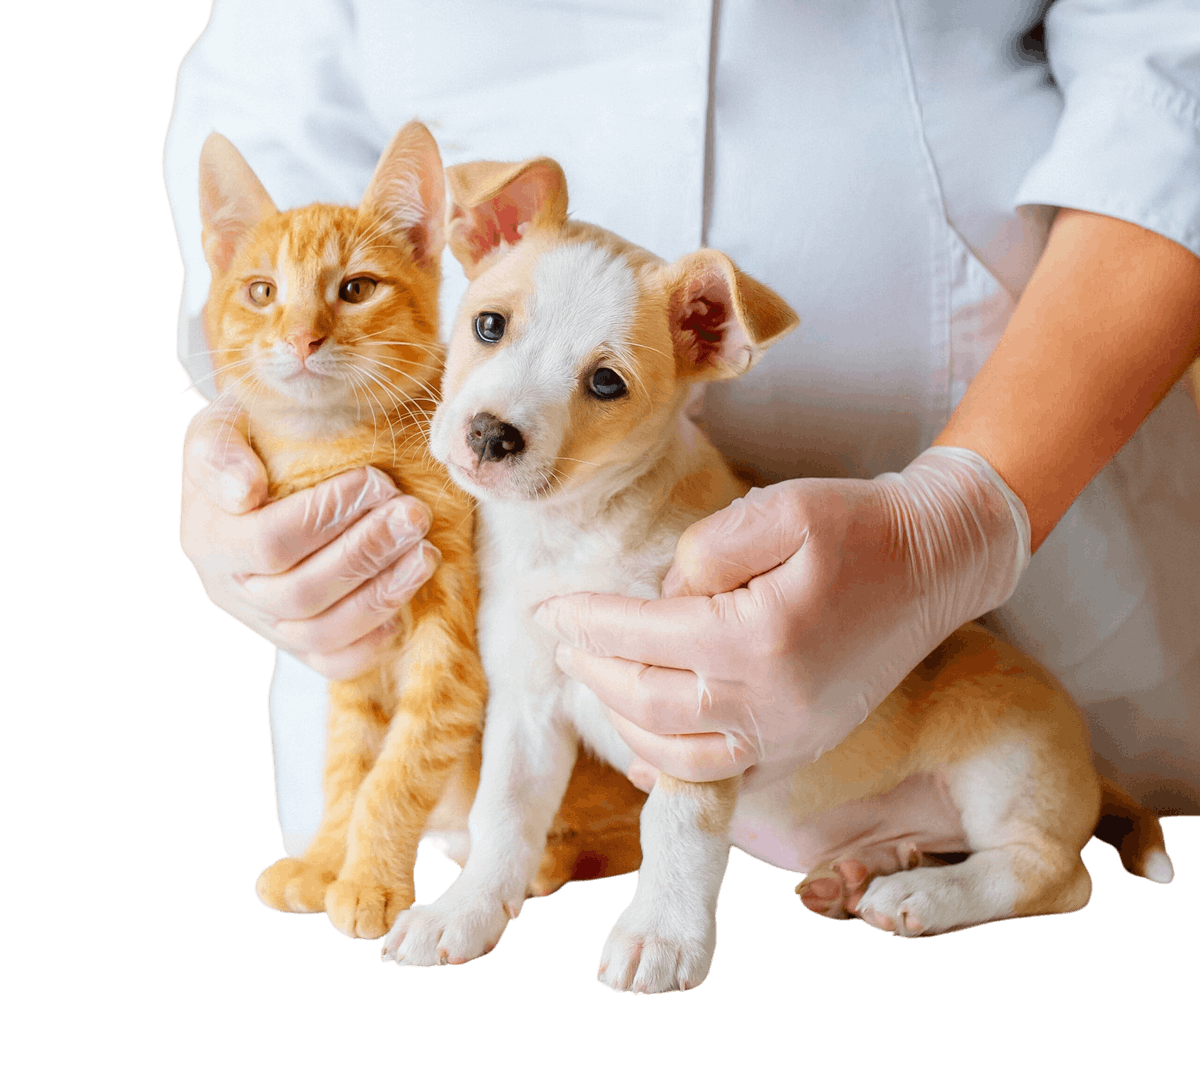 VetAcupuncture_DogsCats: A veterinarian providing acupuncture services to both dogs and cats at the pet resort